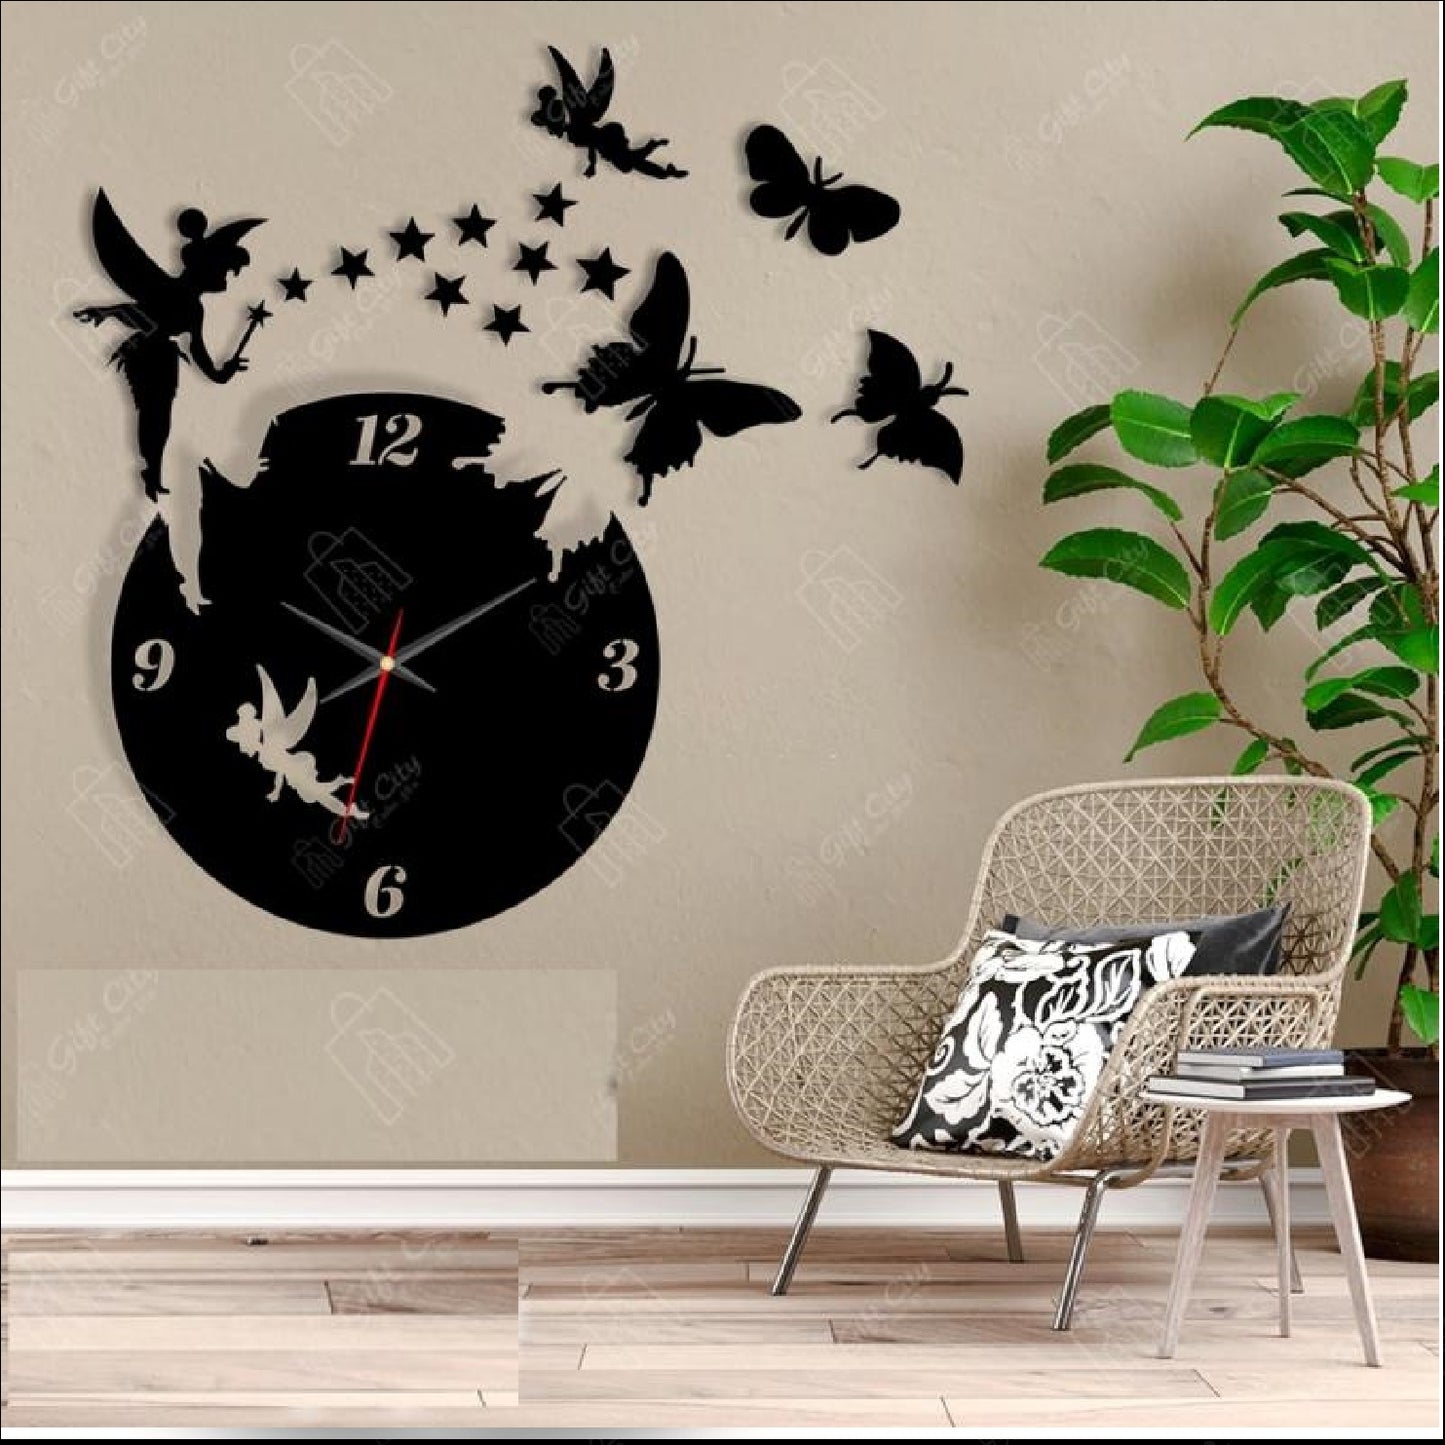 Wooden Fairy Home Wall Clock